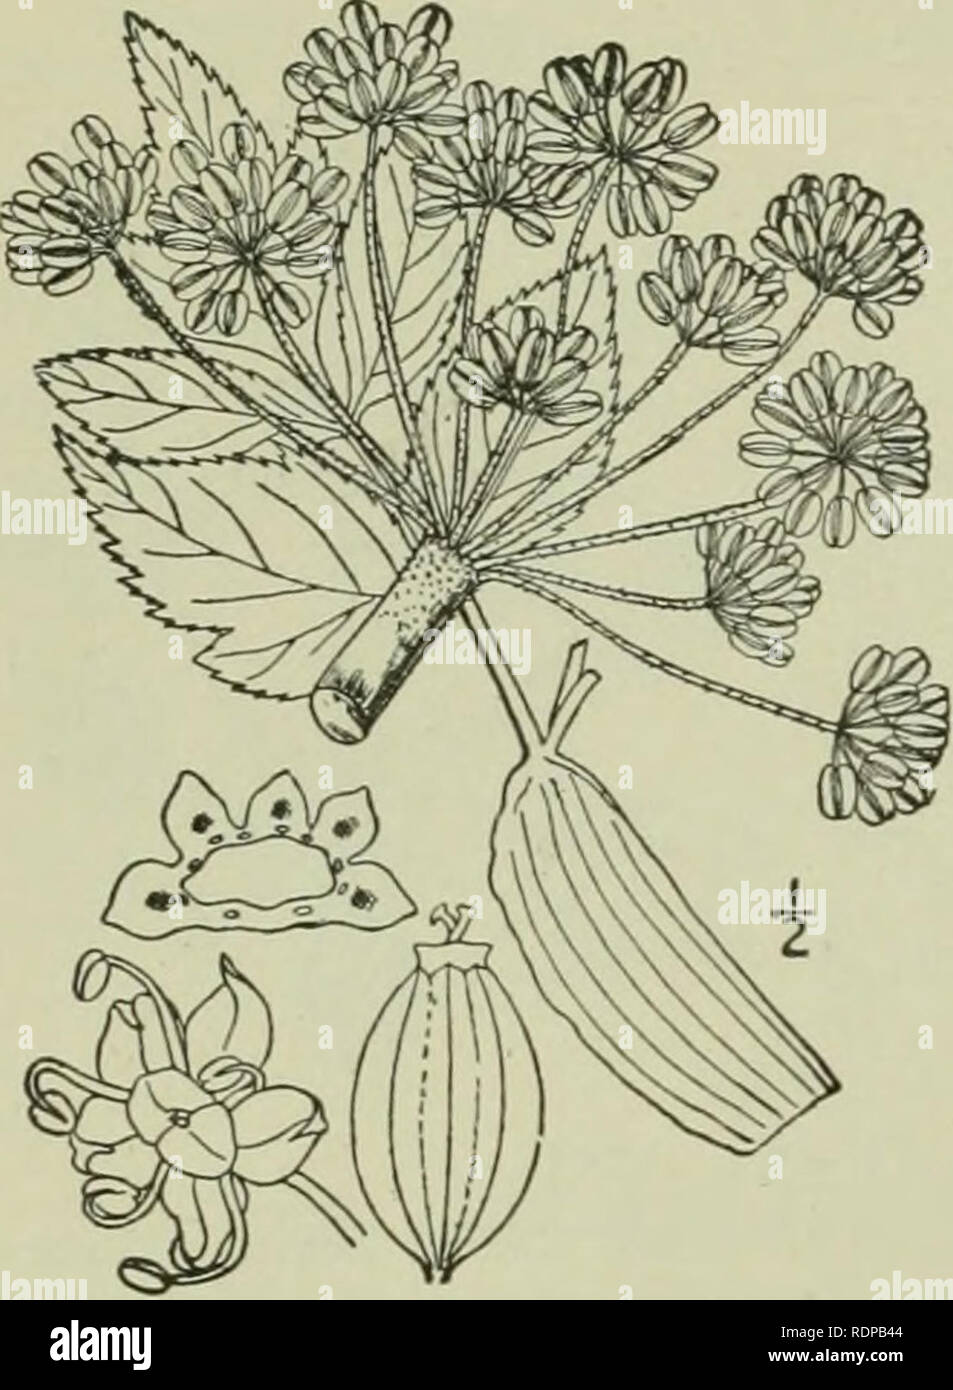 . An illustrated flora of the northern United States, Canada and the British possessions : from Newfoundland to the parallel of the southern boundary of Virginia and from the Atlantic Ocean westward to the 102nd meridian. Botany. 646 AMMIACEAE. Vol. II. I. Coelopleurum actaeifolium (Michx.) Coult. &amp; Rose. Sea-coast Angelica. Fig. 3148. Angelica Archangelica Schrank, Denks. Regens. Bot. Gesel'l. i: Abth. 2. 13. 1818. Not. L. 1753. Archangelica peregrina Nutt.; T. &amp; G. Fl. N. A. i: 622. 1840. Ligusticum aclaeifoliuin Michx. Fl. Bor. Am. i: 166. 1S03. Coelopleurum actaeifolium Coult. &amp Stock Photo